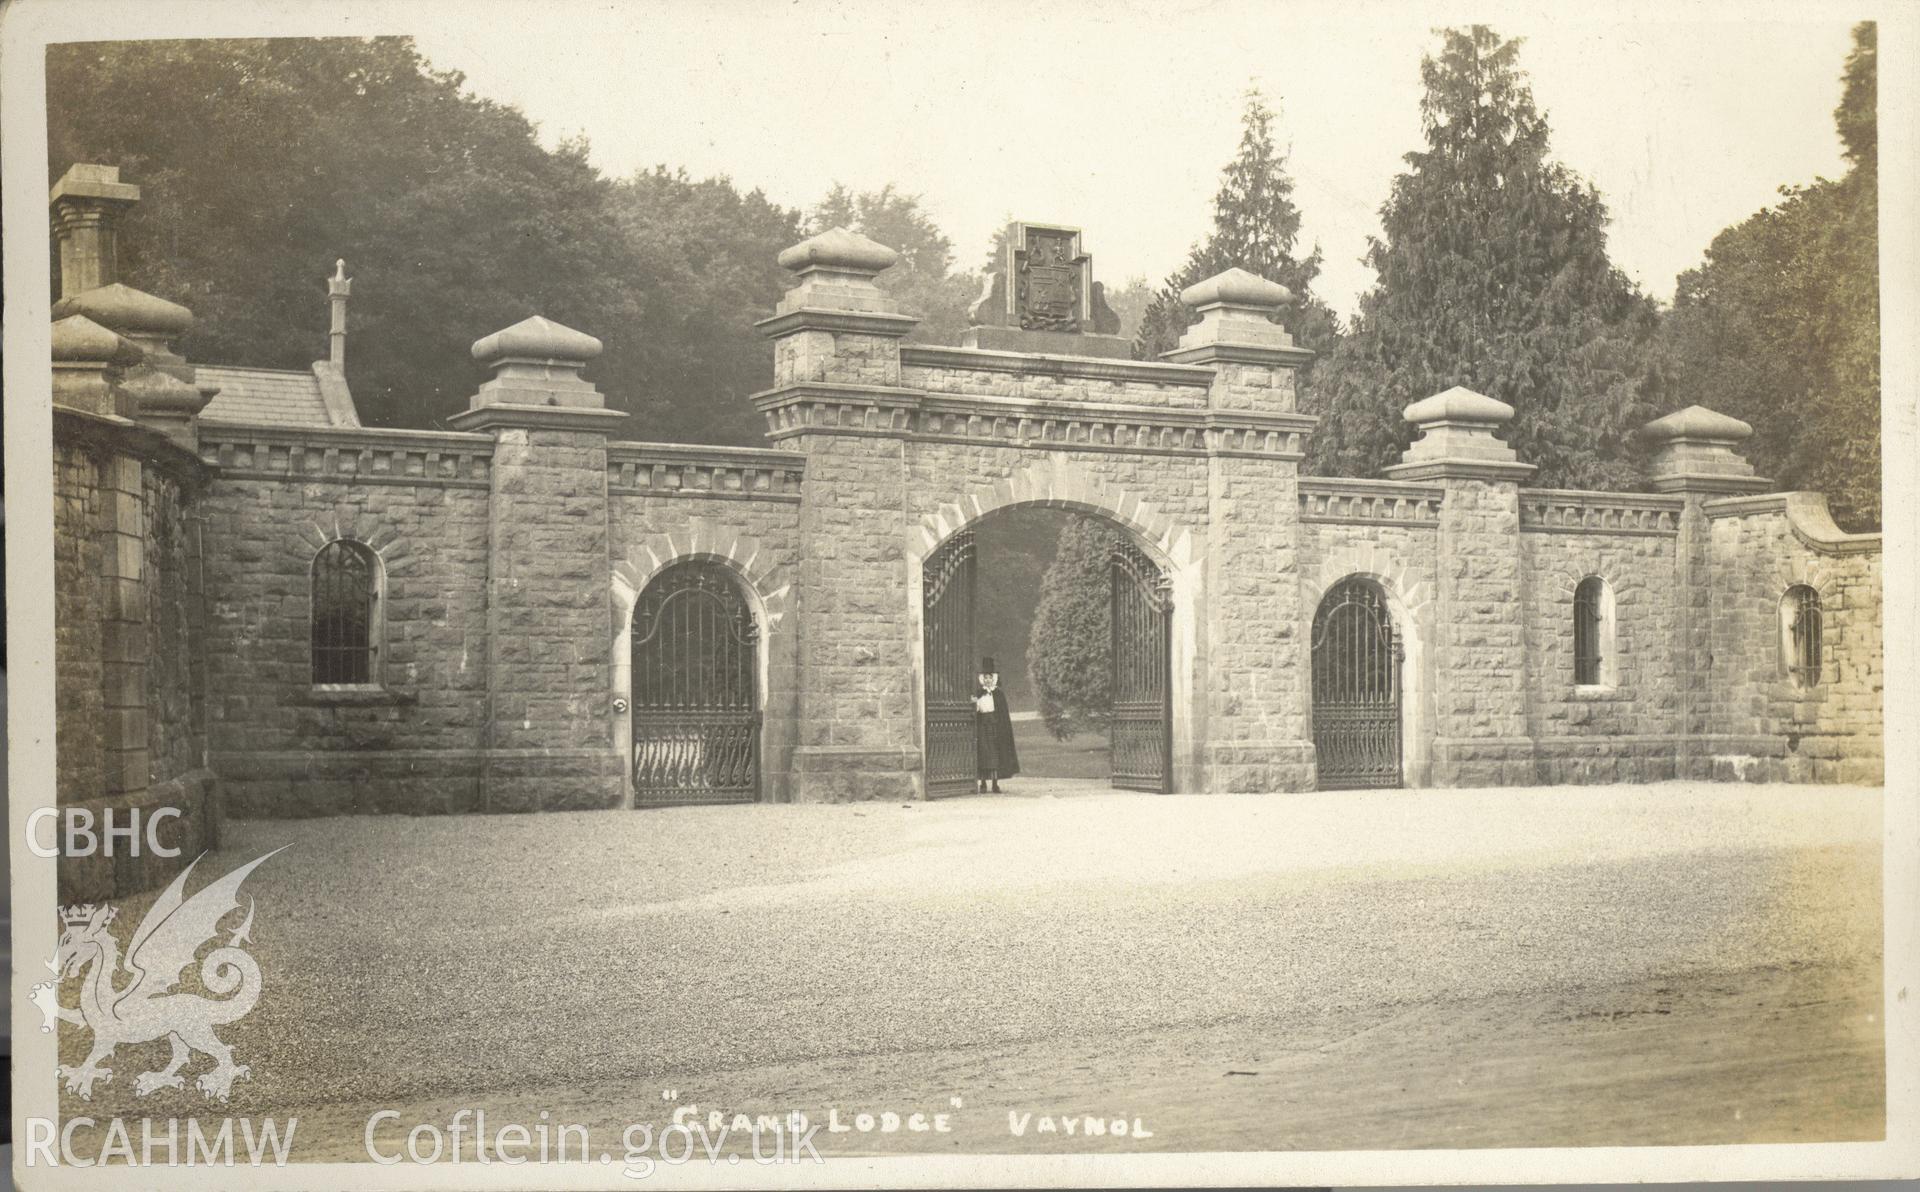 Digitised postcard image of Main Entrance and Lodge, Vaynol, with figure in Welsh costume, J.H. Jones, Port Dinorwic. Produced by Parks and Gardens Data Services, from an original item in the Peter Davis Collection at Parks and Gardens UK. We hold only web-resolution images of this collection, suitable for viewing on screen and for research purposes only. We do not hold the original images, or publication quality scans.